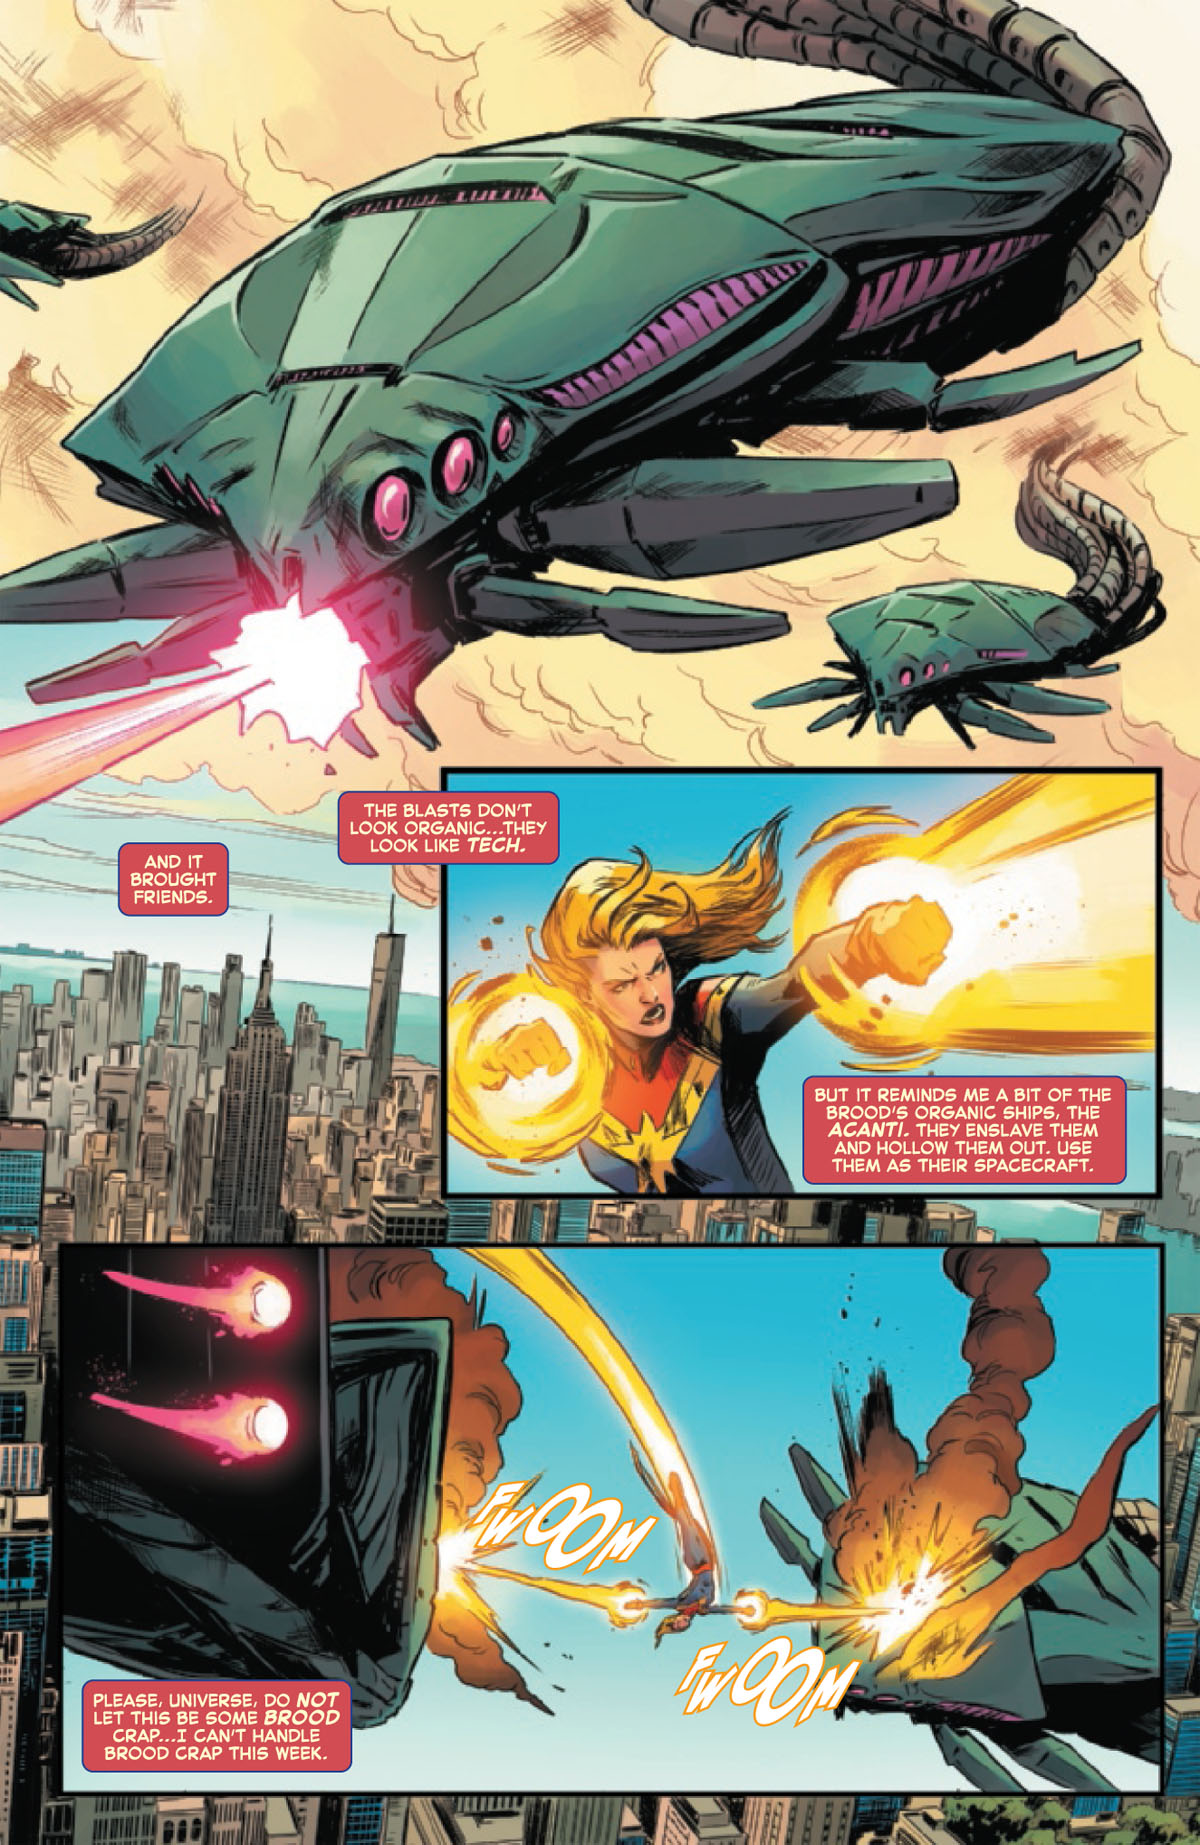 Captain Marvel #8 page 3